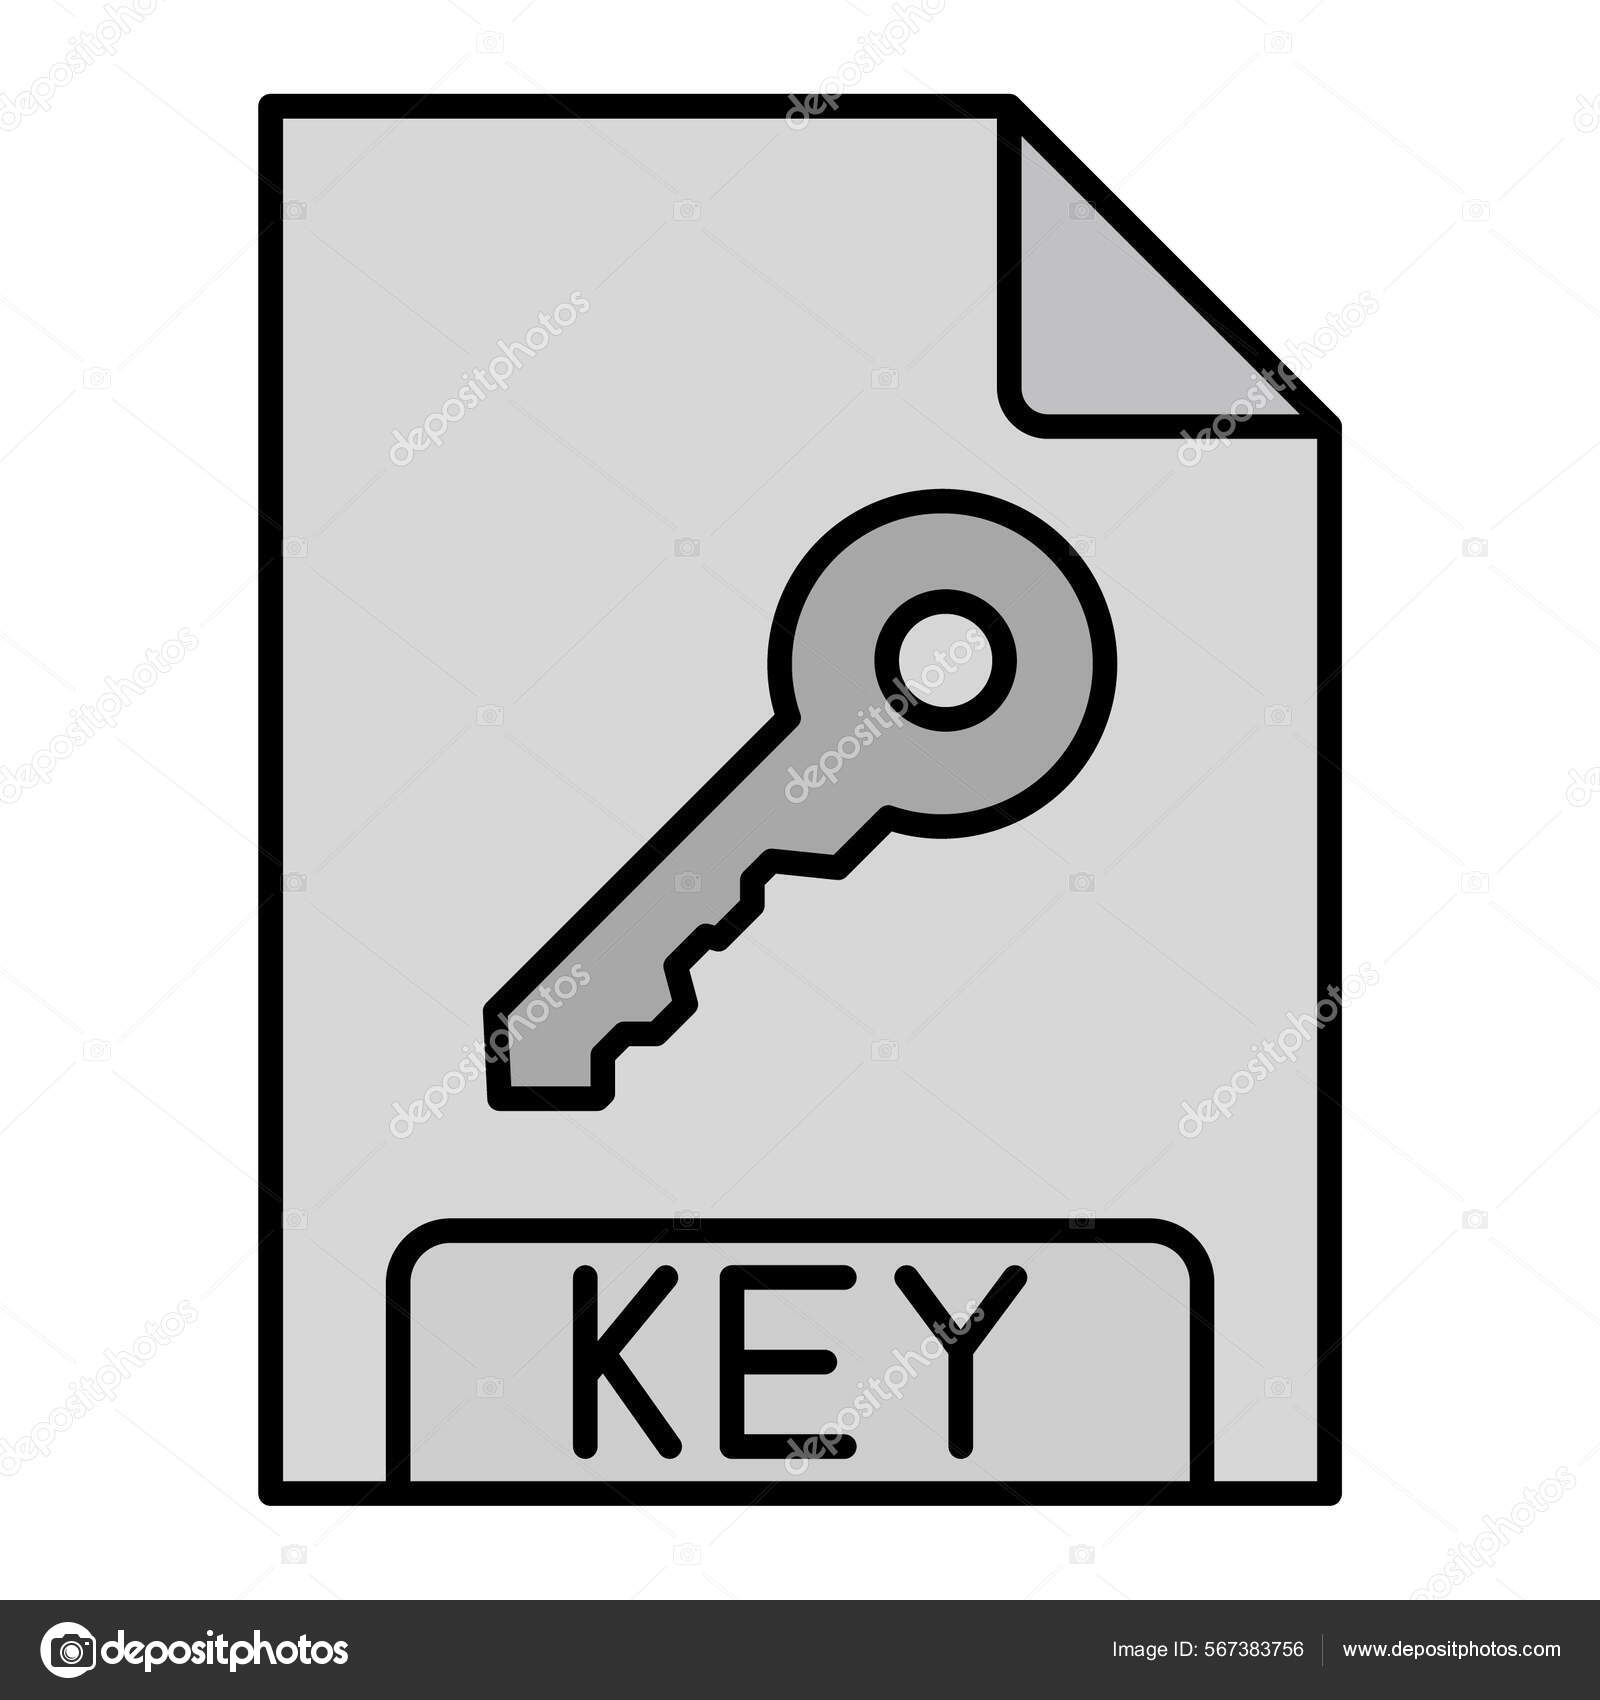 House Key SVG Files Keys Vector Images Clipart Keyring Png eps, Png ,dxf  Stencil T Car Keys Clip Art Files for Silhouette 